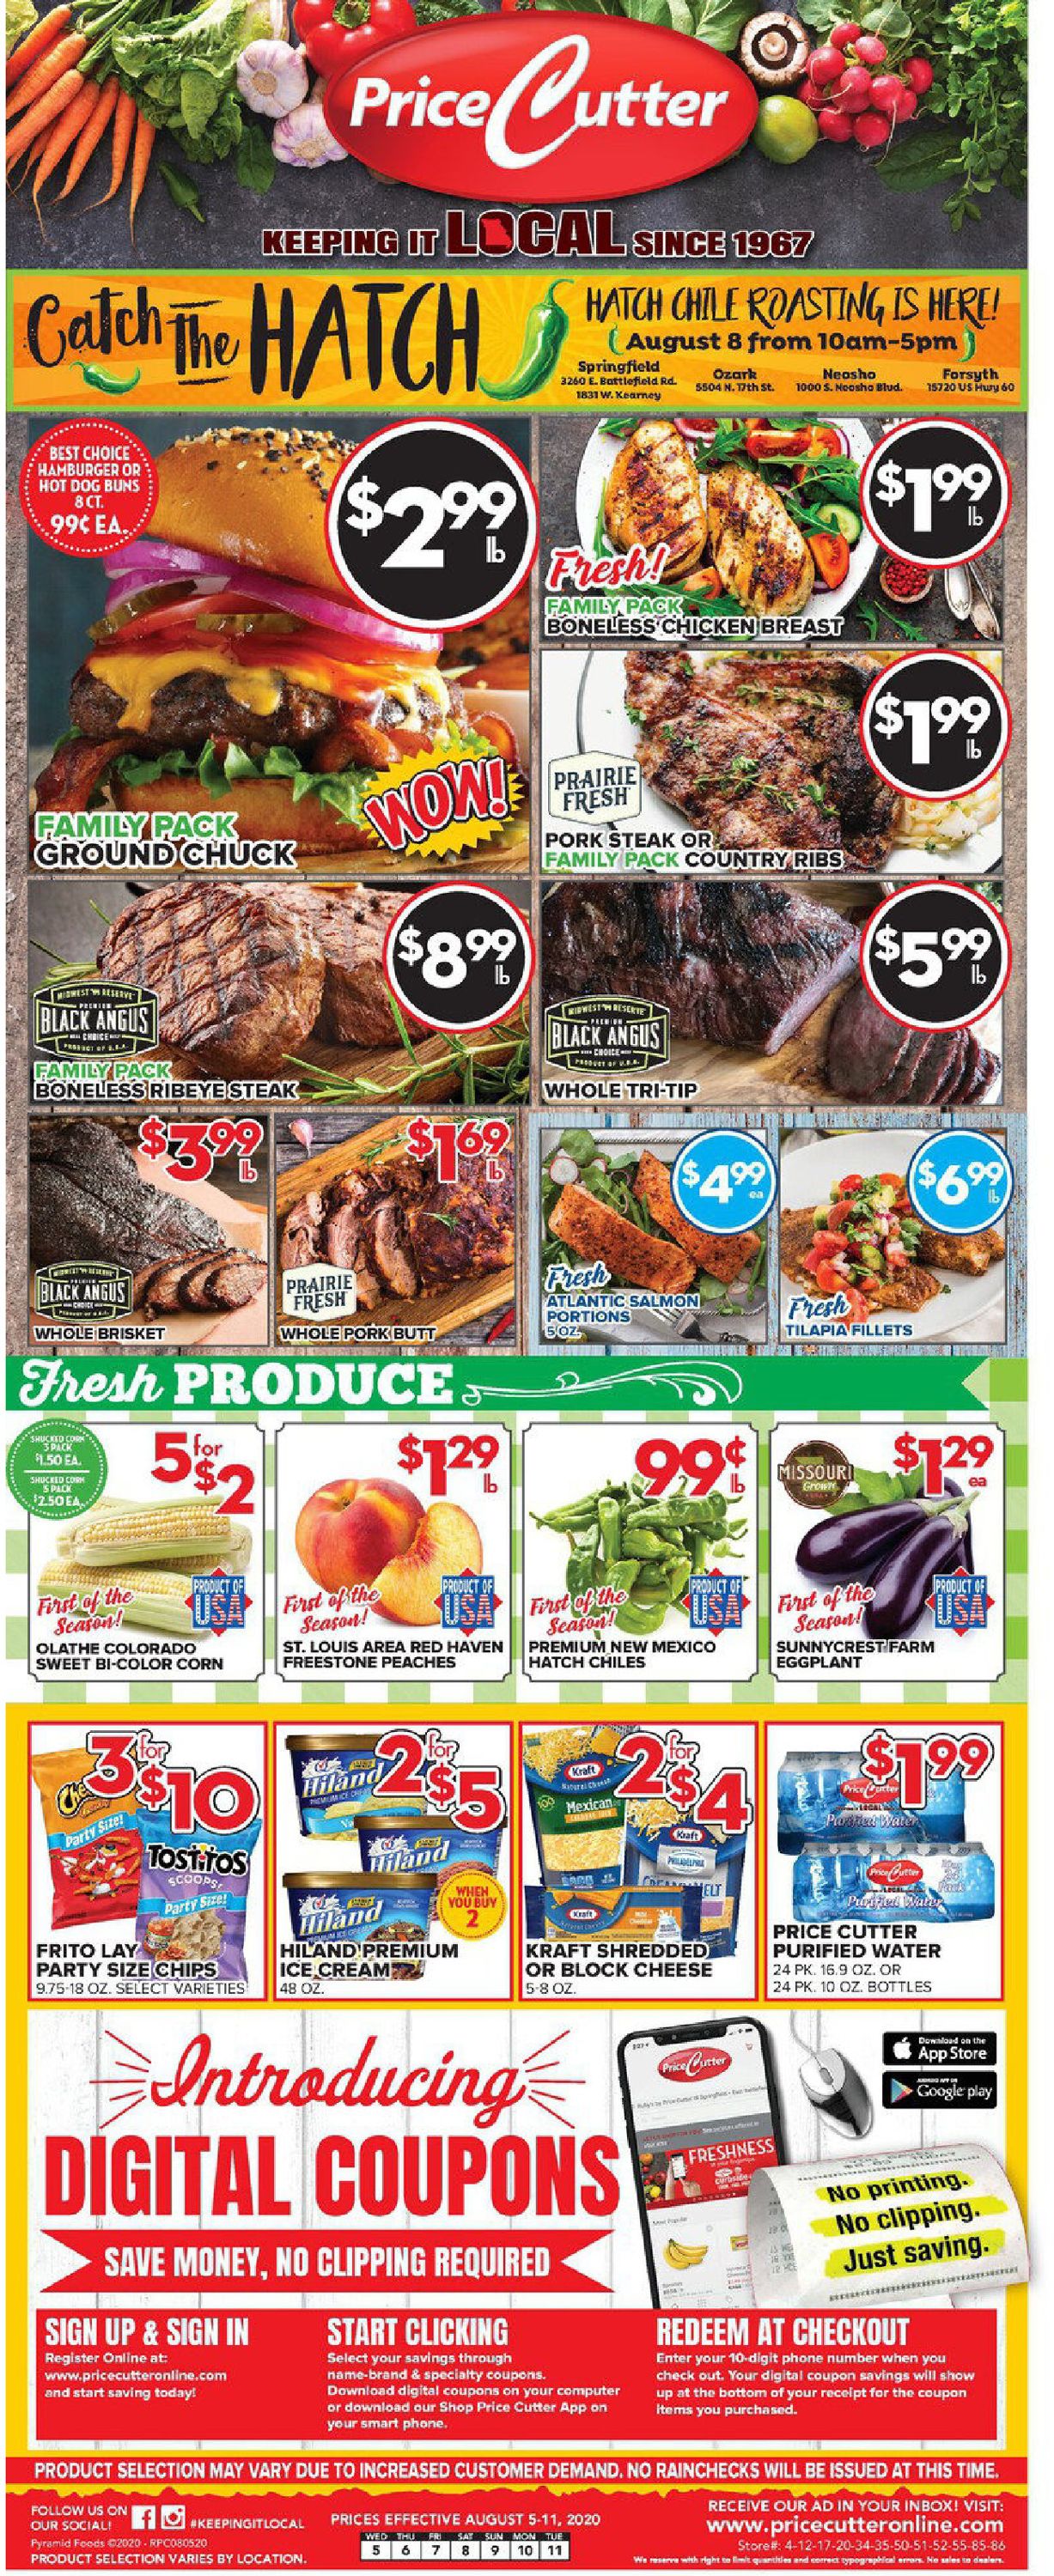 Price Cutter Weekly Ad Circular - valid 08/05-08/11/2020